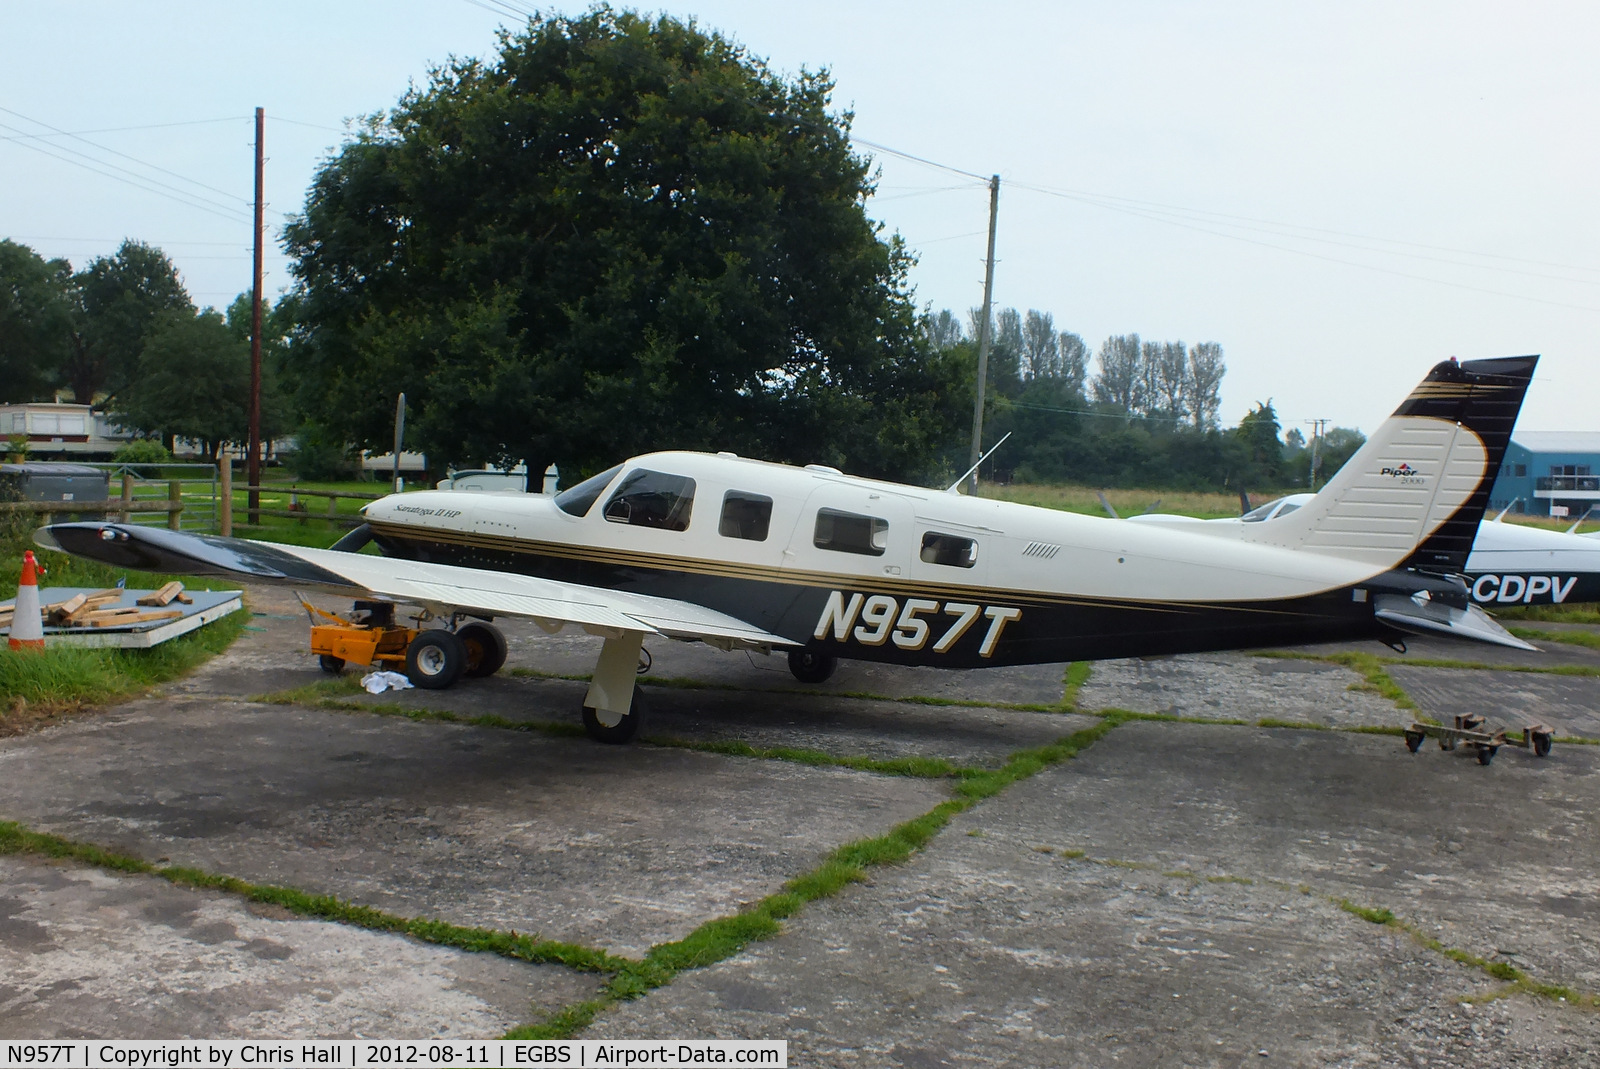 N957T, 2000 Piper PA-32R-301 C/N 3246176, at Shobdon Airfield, Herefordshire